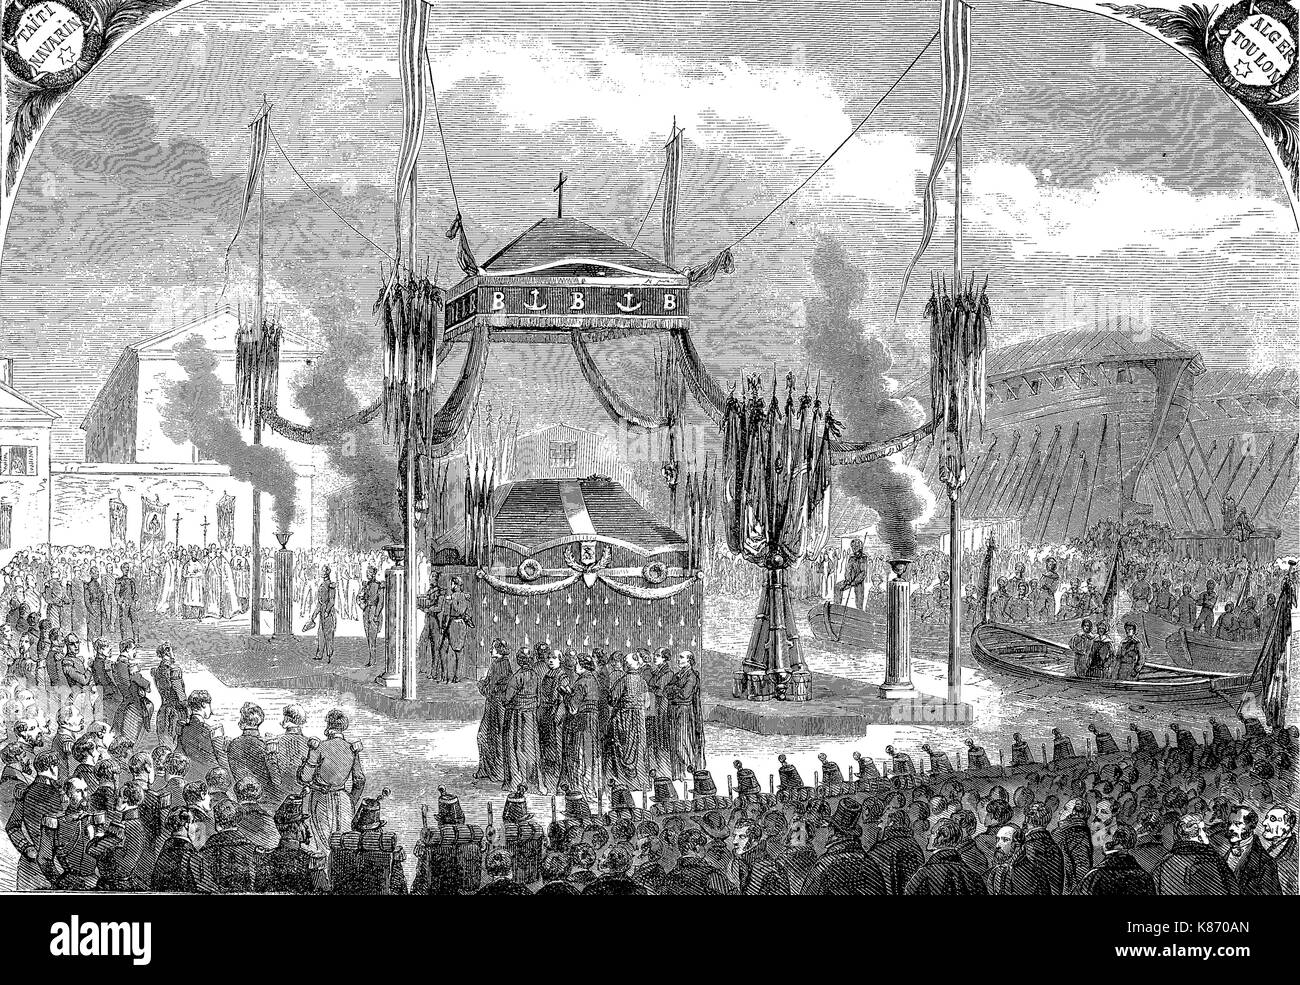 funeral, burial procesion of Armand Joseph Bruat, 1796 - 1855, a French admiral, Crimean War 1853 - 1856, Digital improved reproduction of an original woodprint from the 19th century Stock Photo